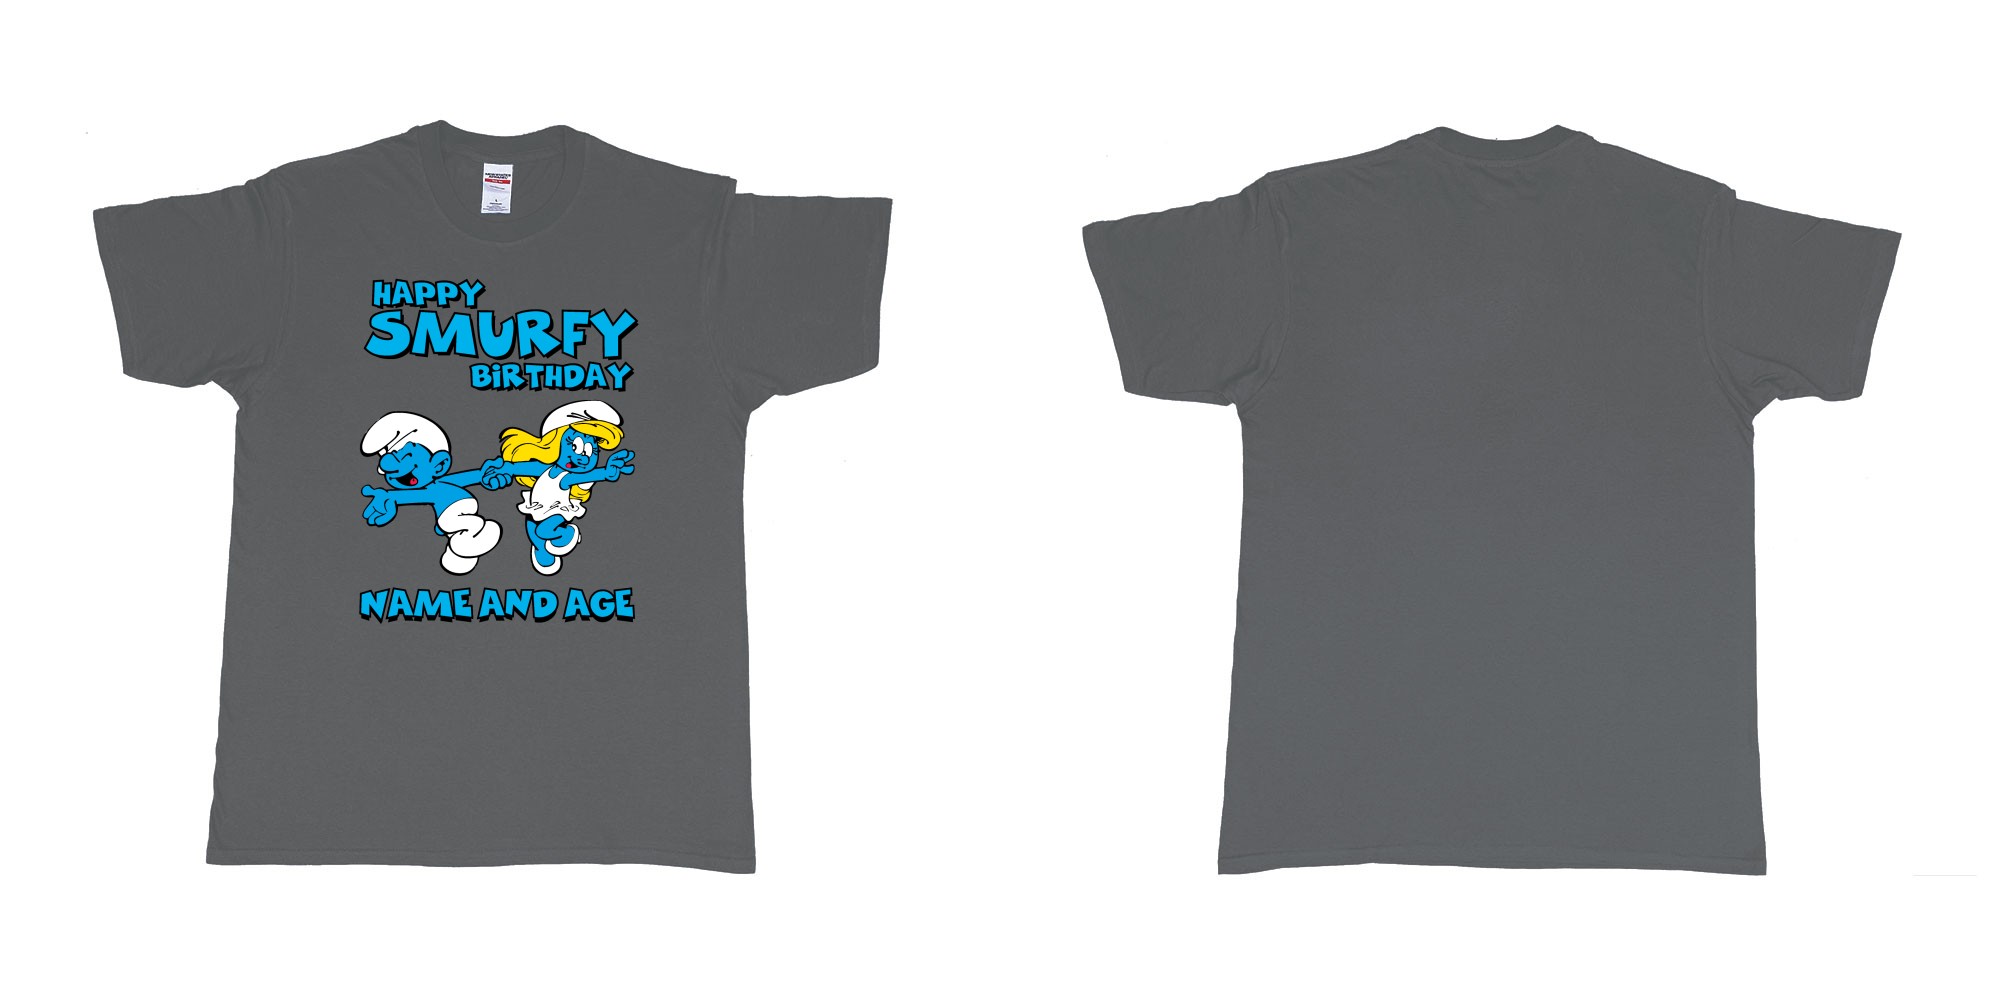 Custom tshirt design happy smurfy birthday in fabric color charcoal choice your own text made in Bali by The Pirate Way